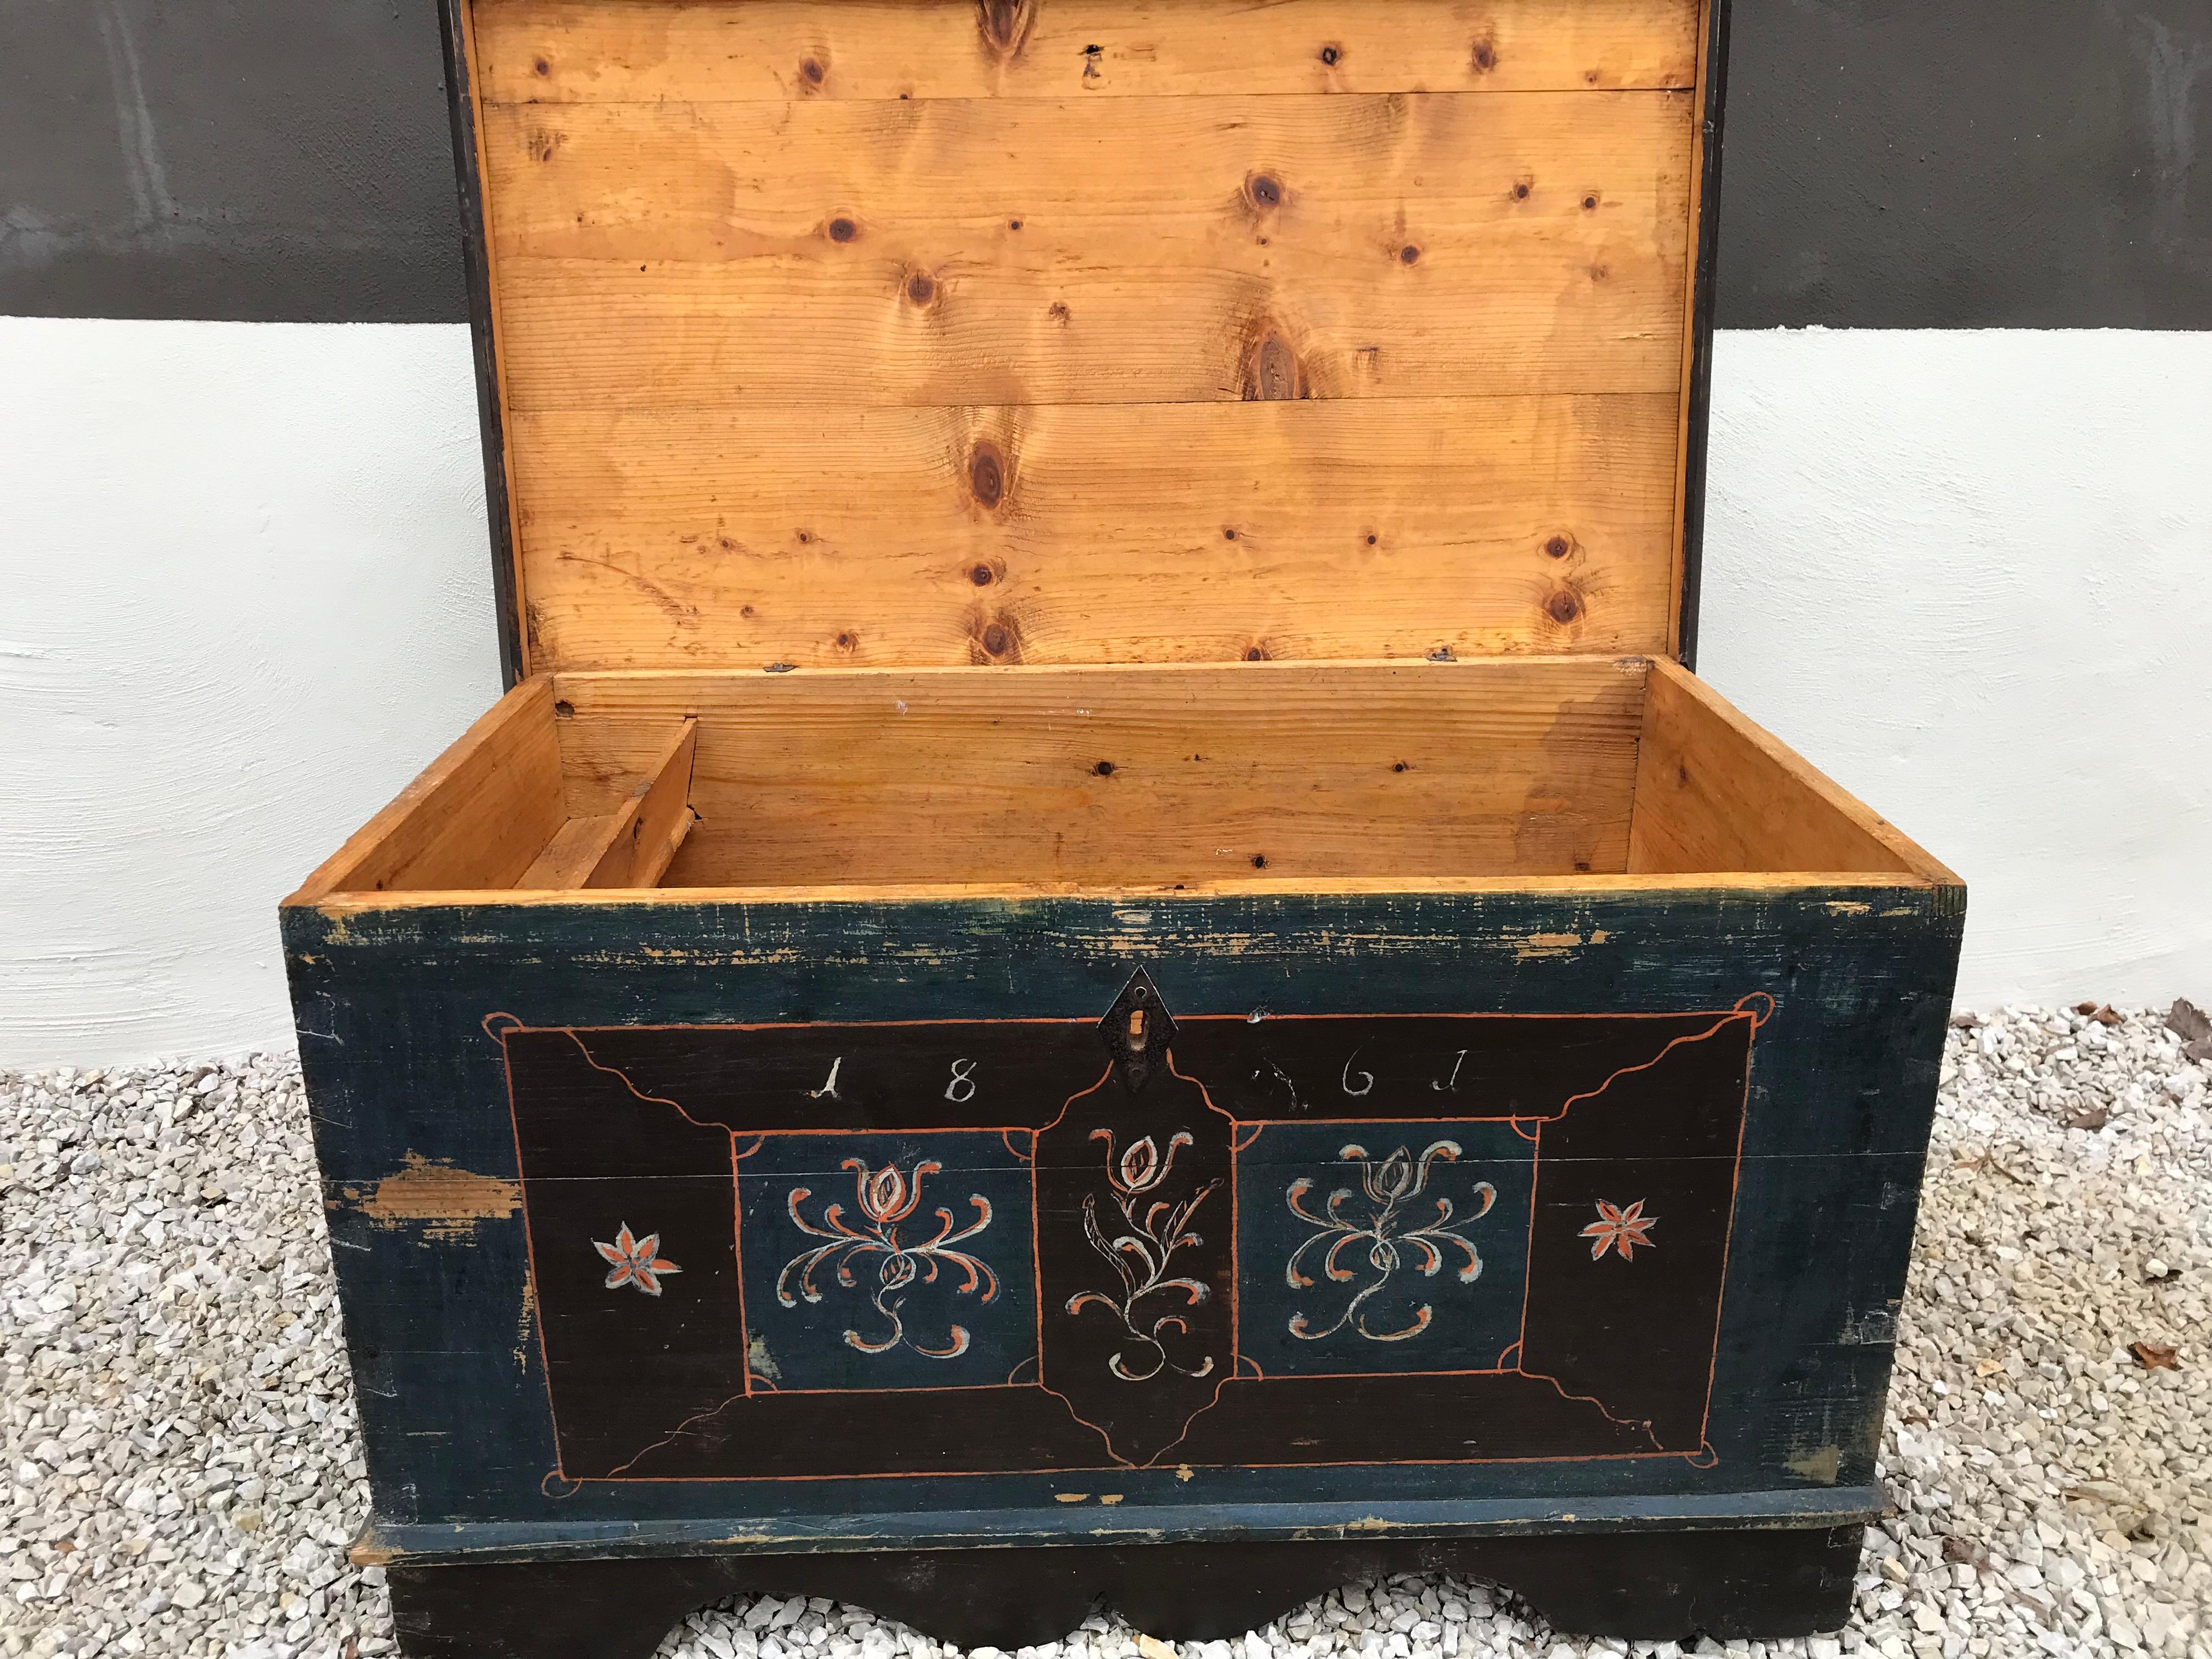 This painted chest comes from Slovakia,
year 1861.